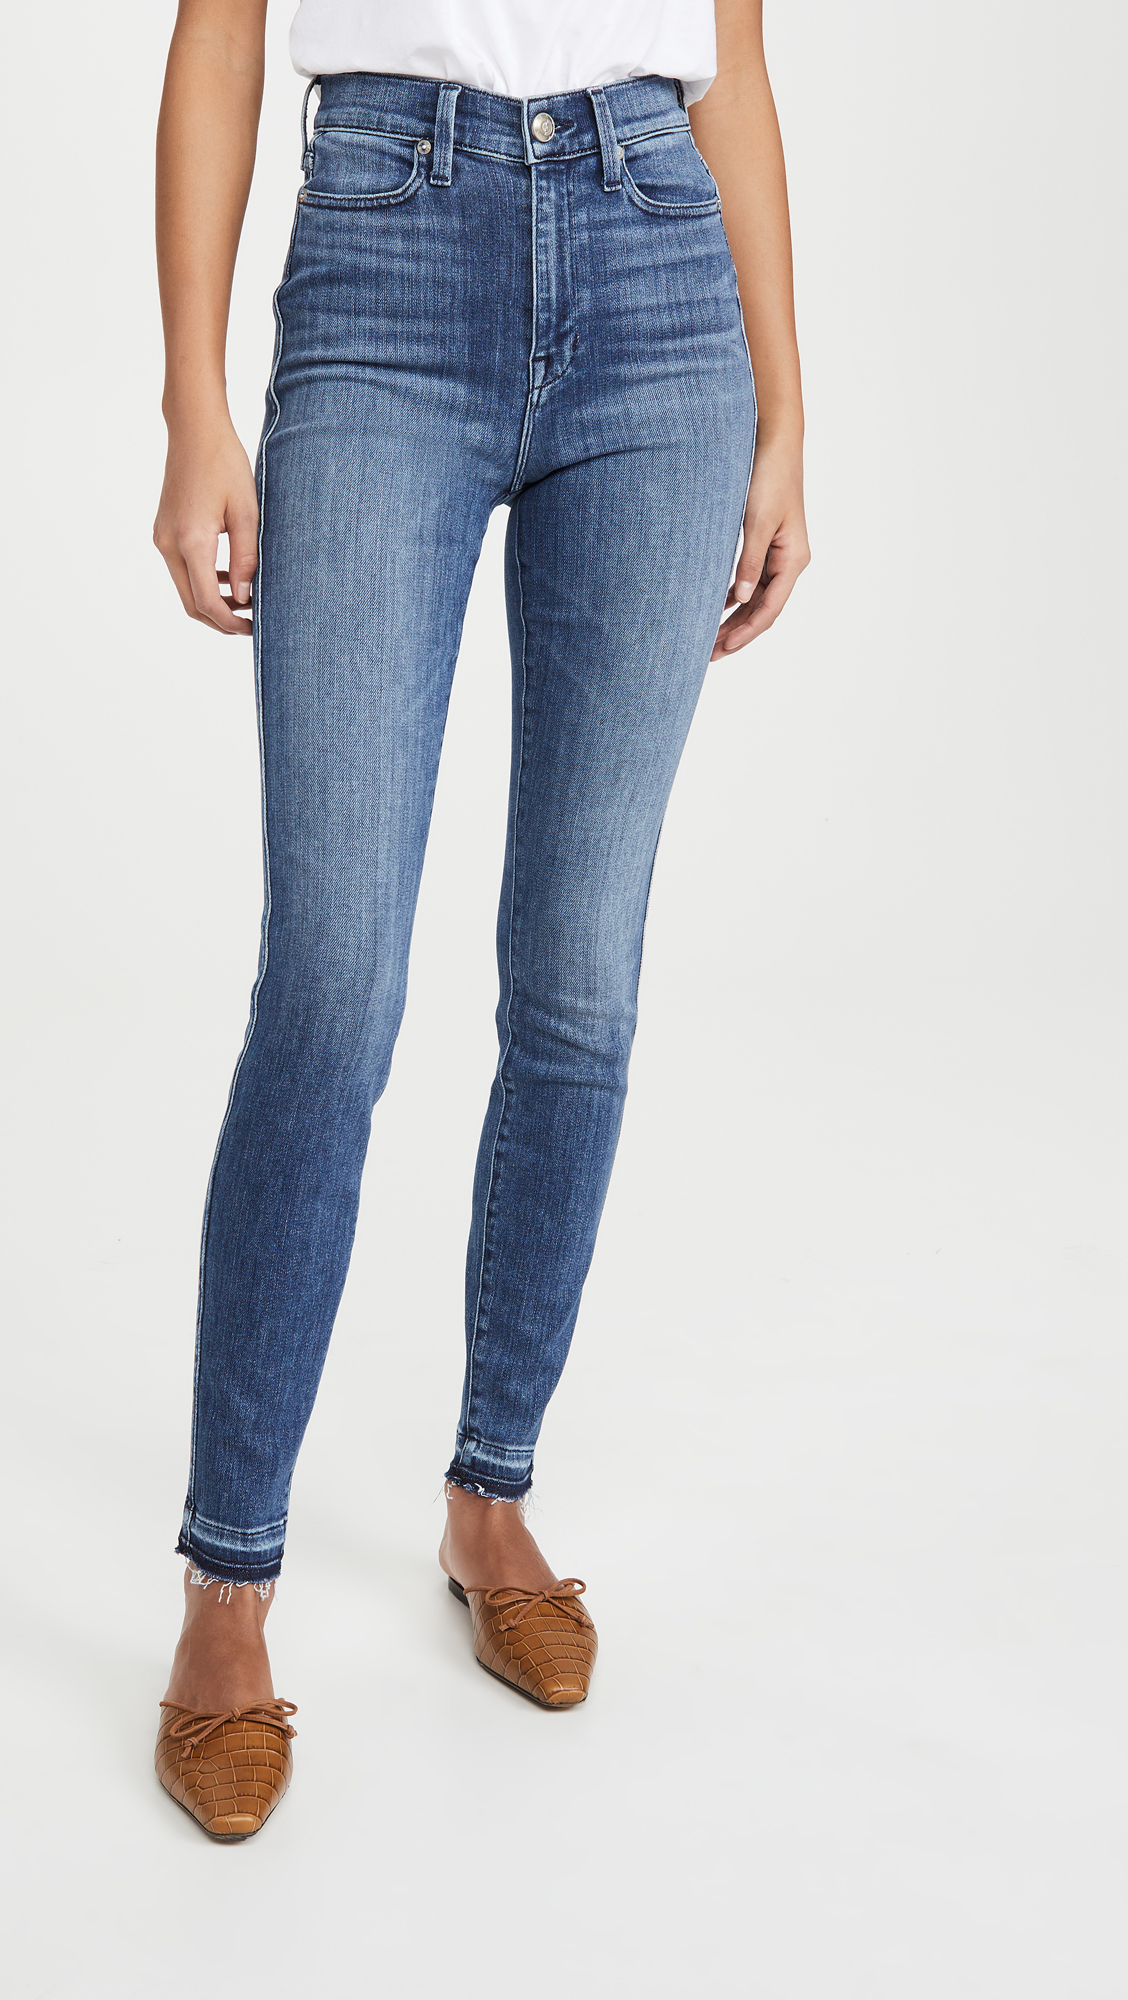 31 Full-Length Jeans That Are Perfect for Tall Women | Who What Wear